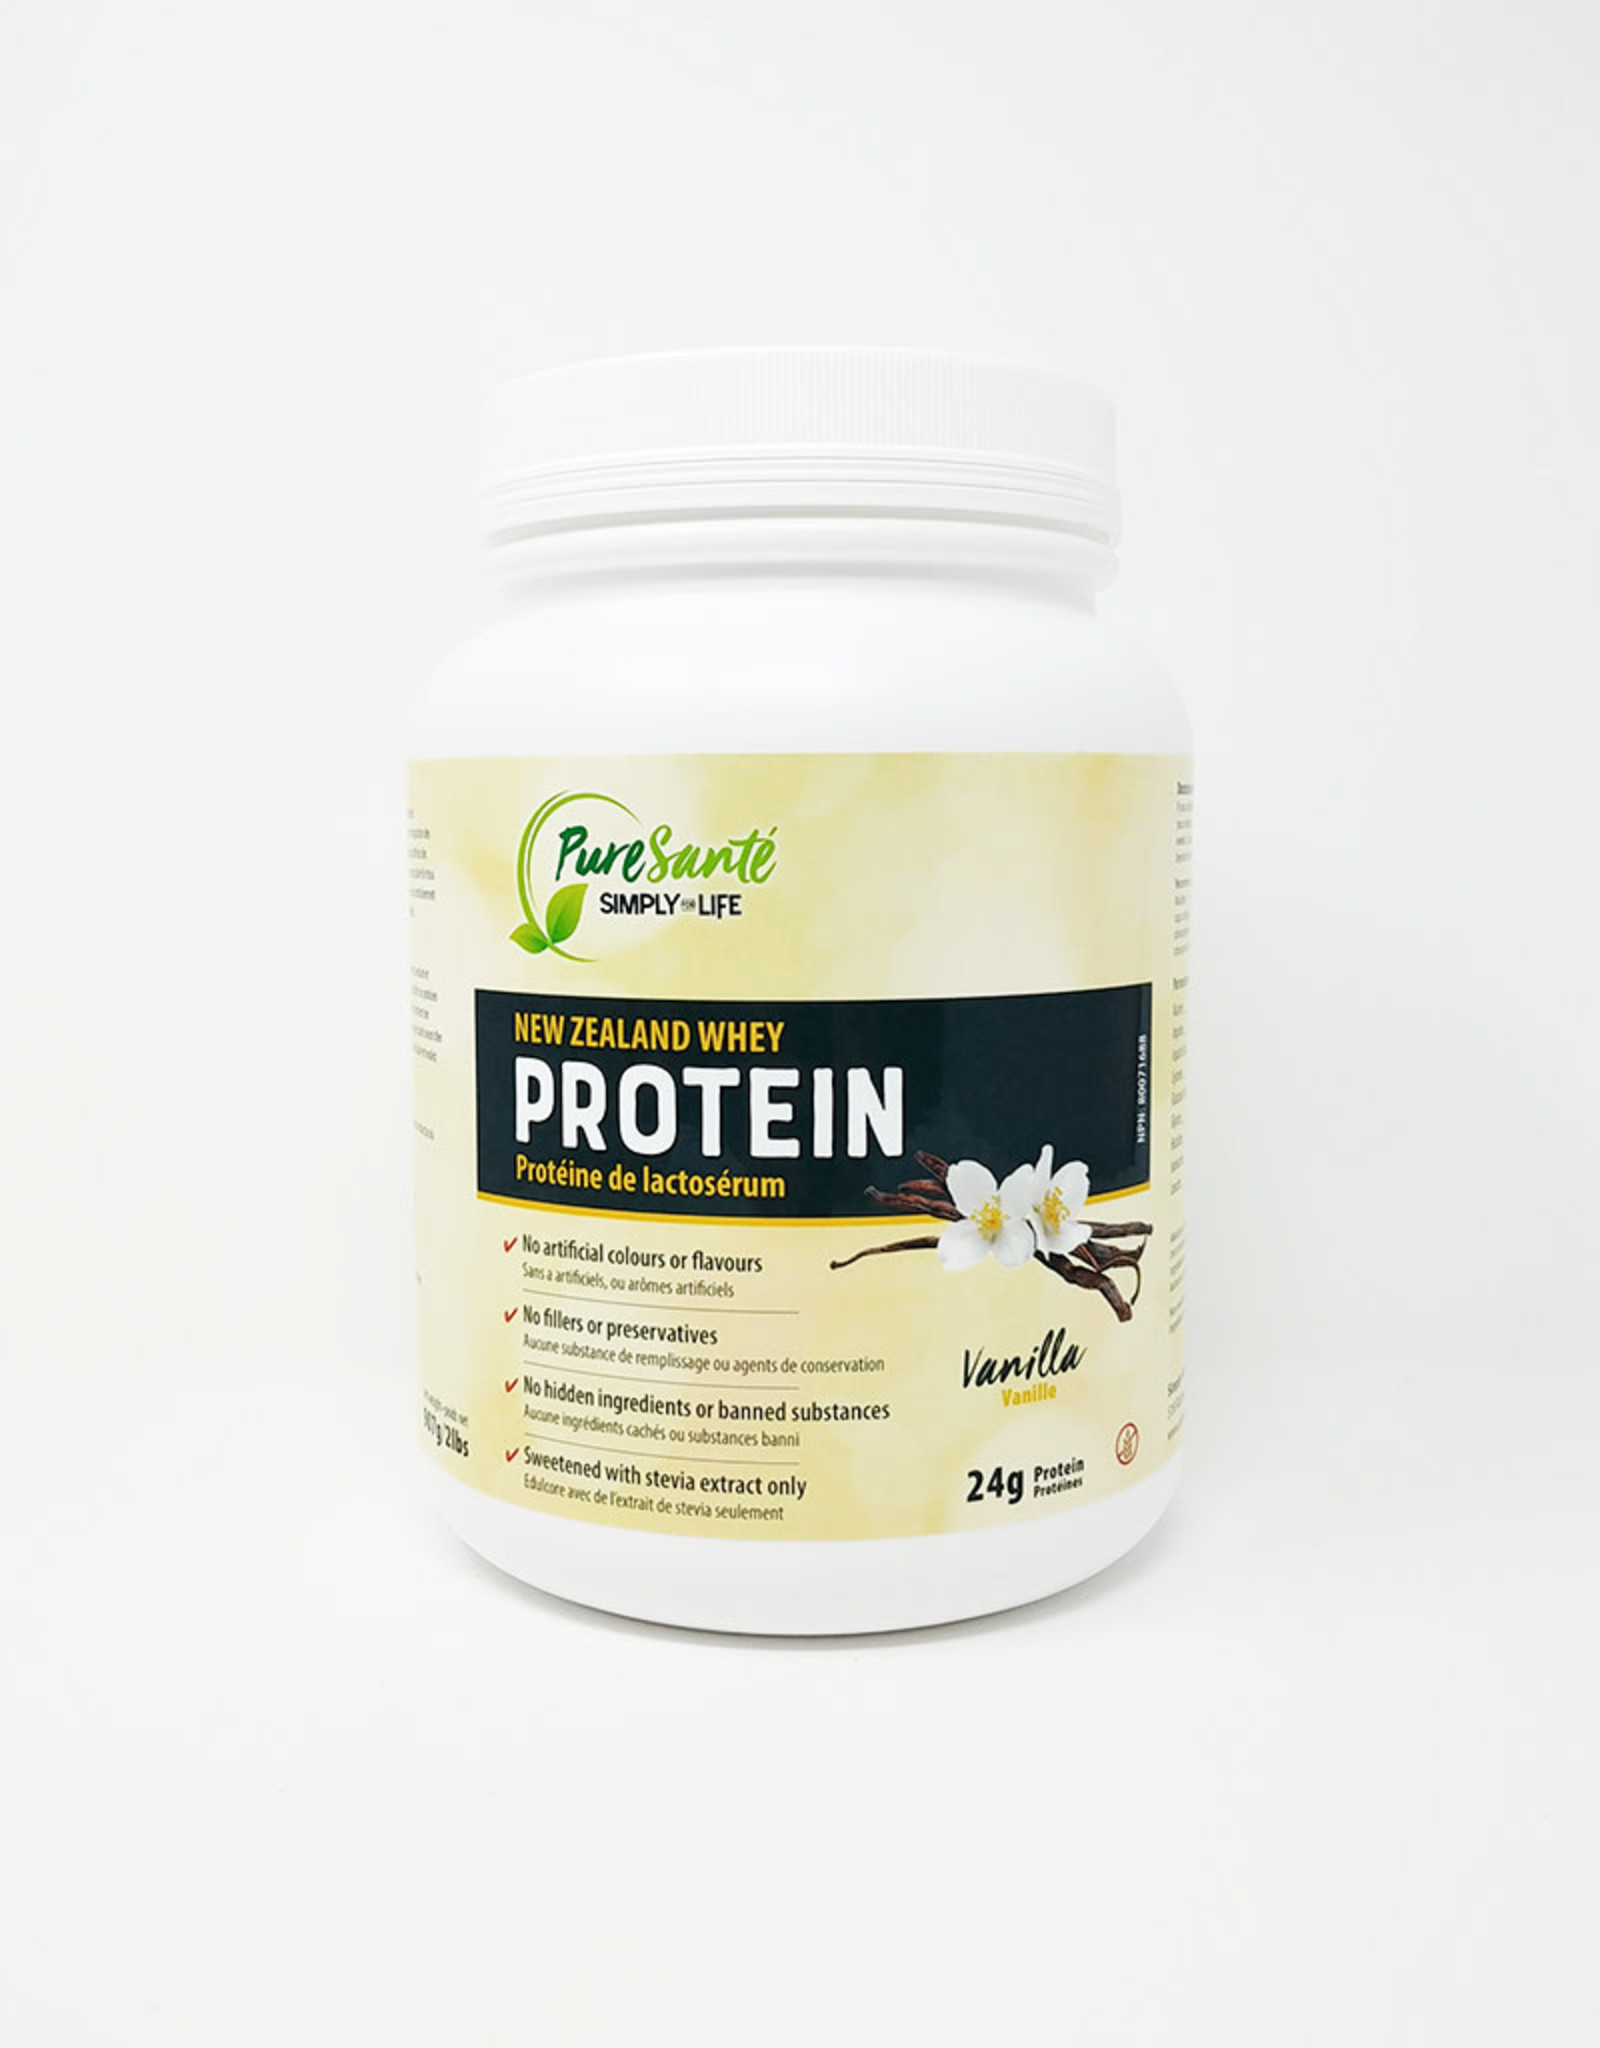 Simply For Life SFL - Protein Powder, Vanilla (2 lbs)